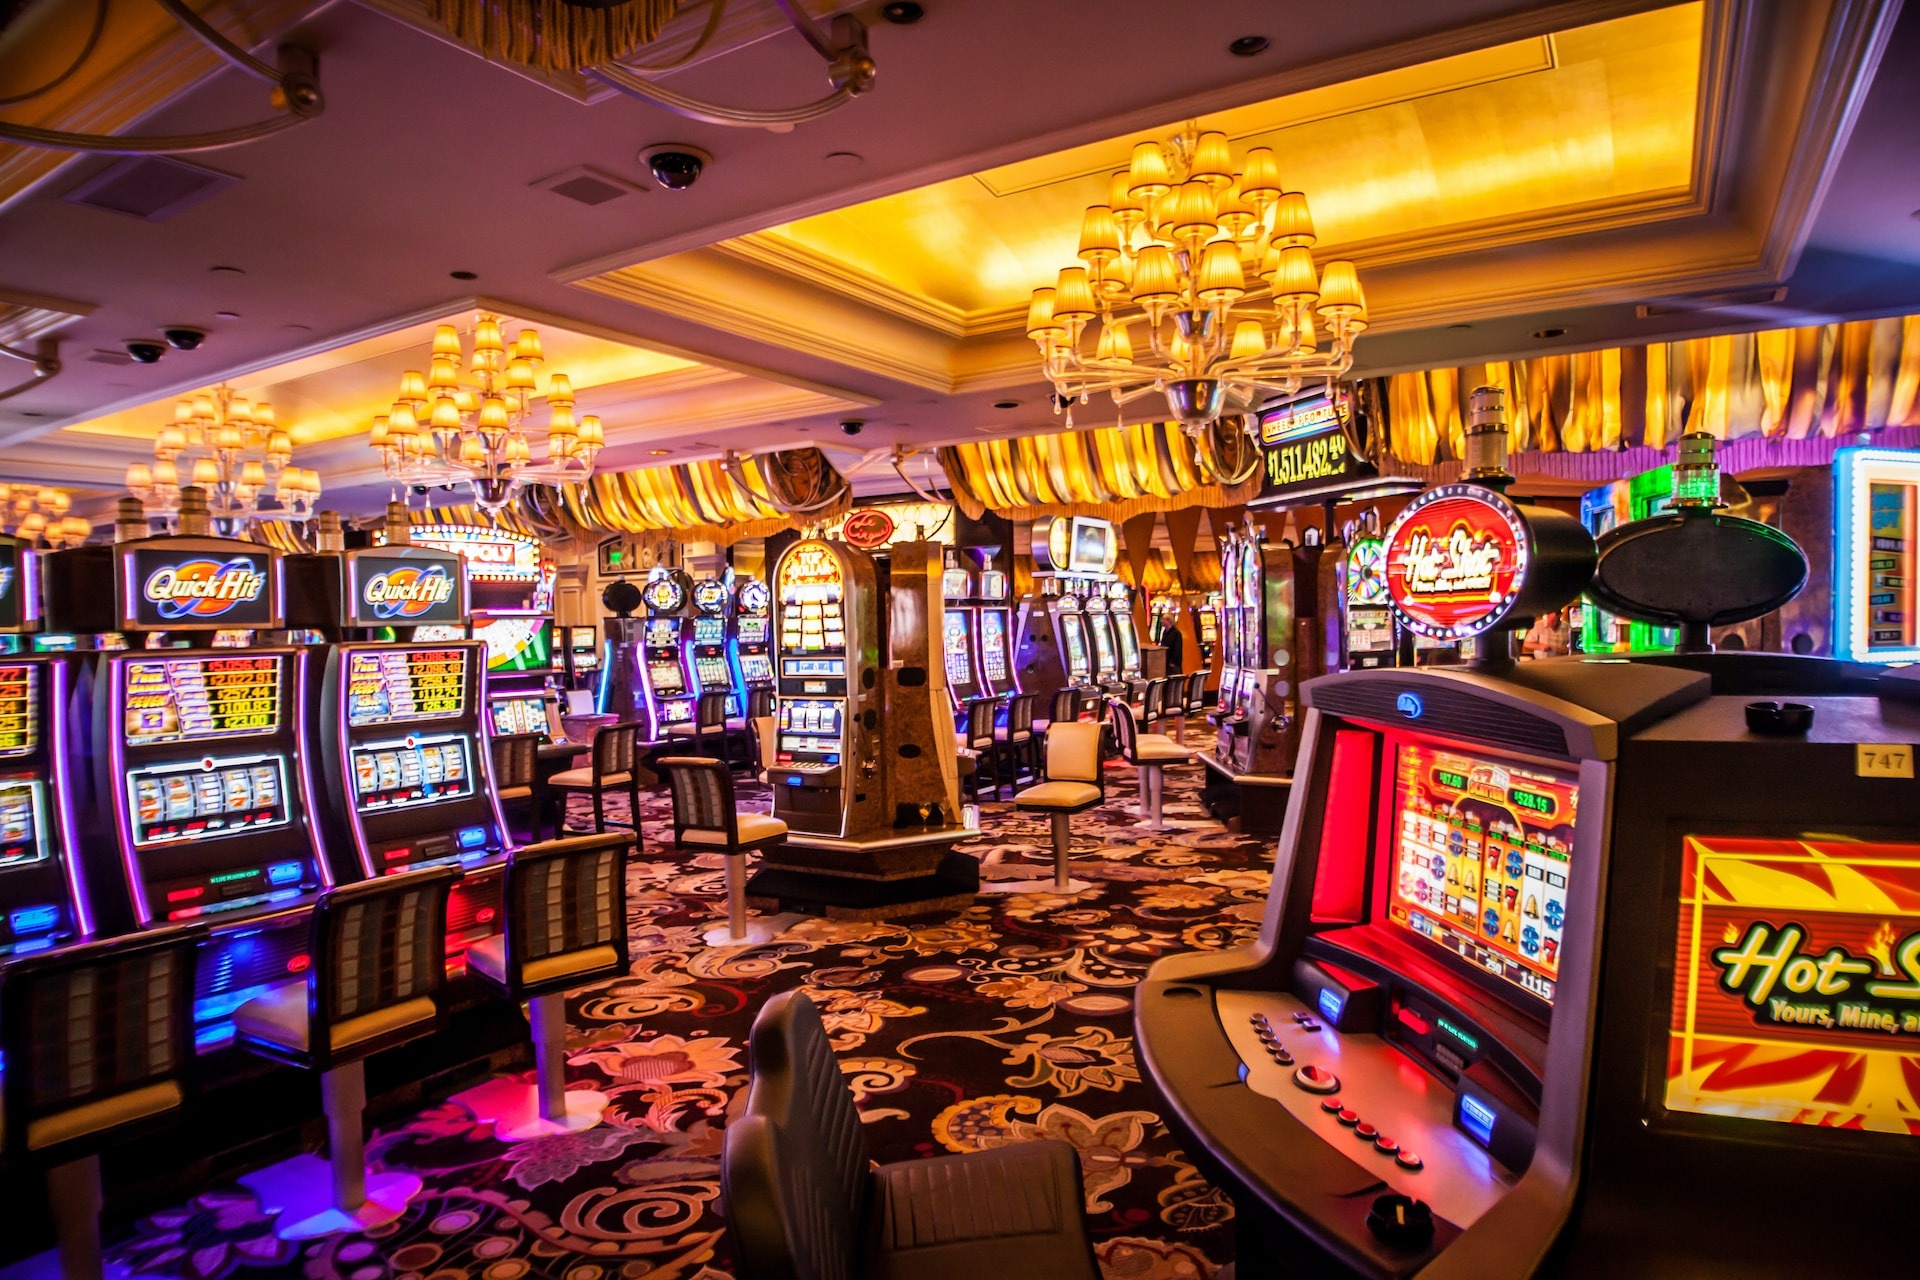 Why is casino availability increased during quarantine?